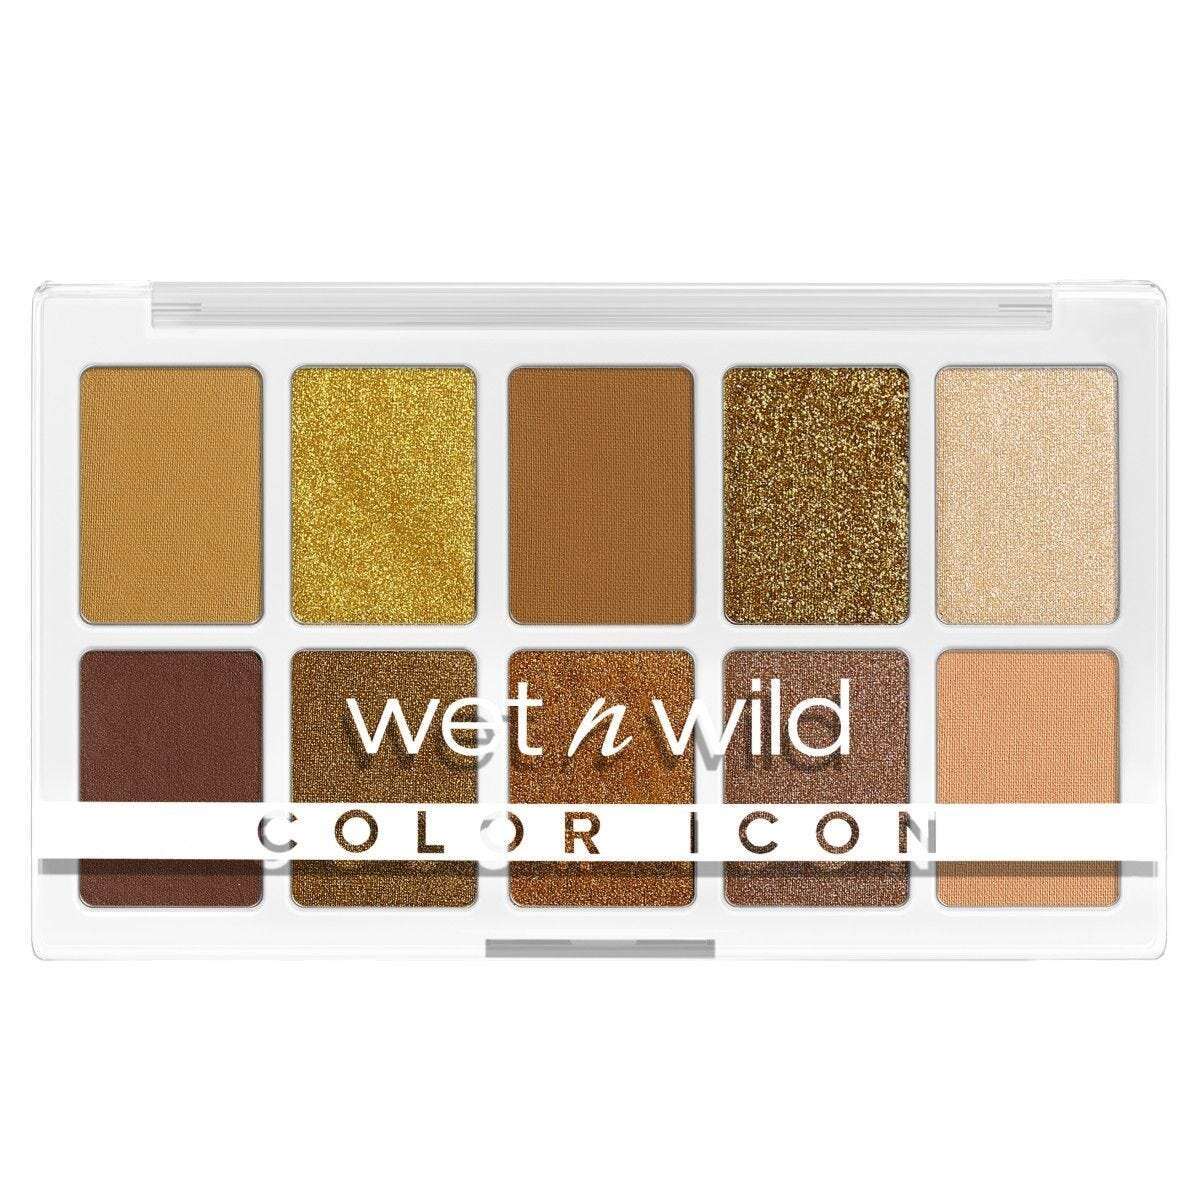 CALL ME SUNSHINE COLOR ICON 10 PAN EYESHADOW PALETTE - WET N WILD